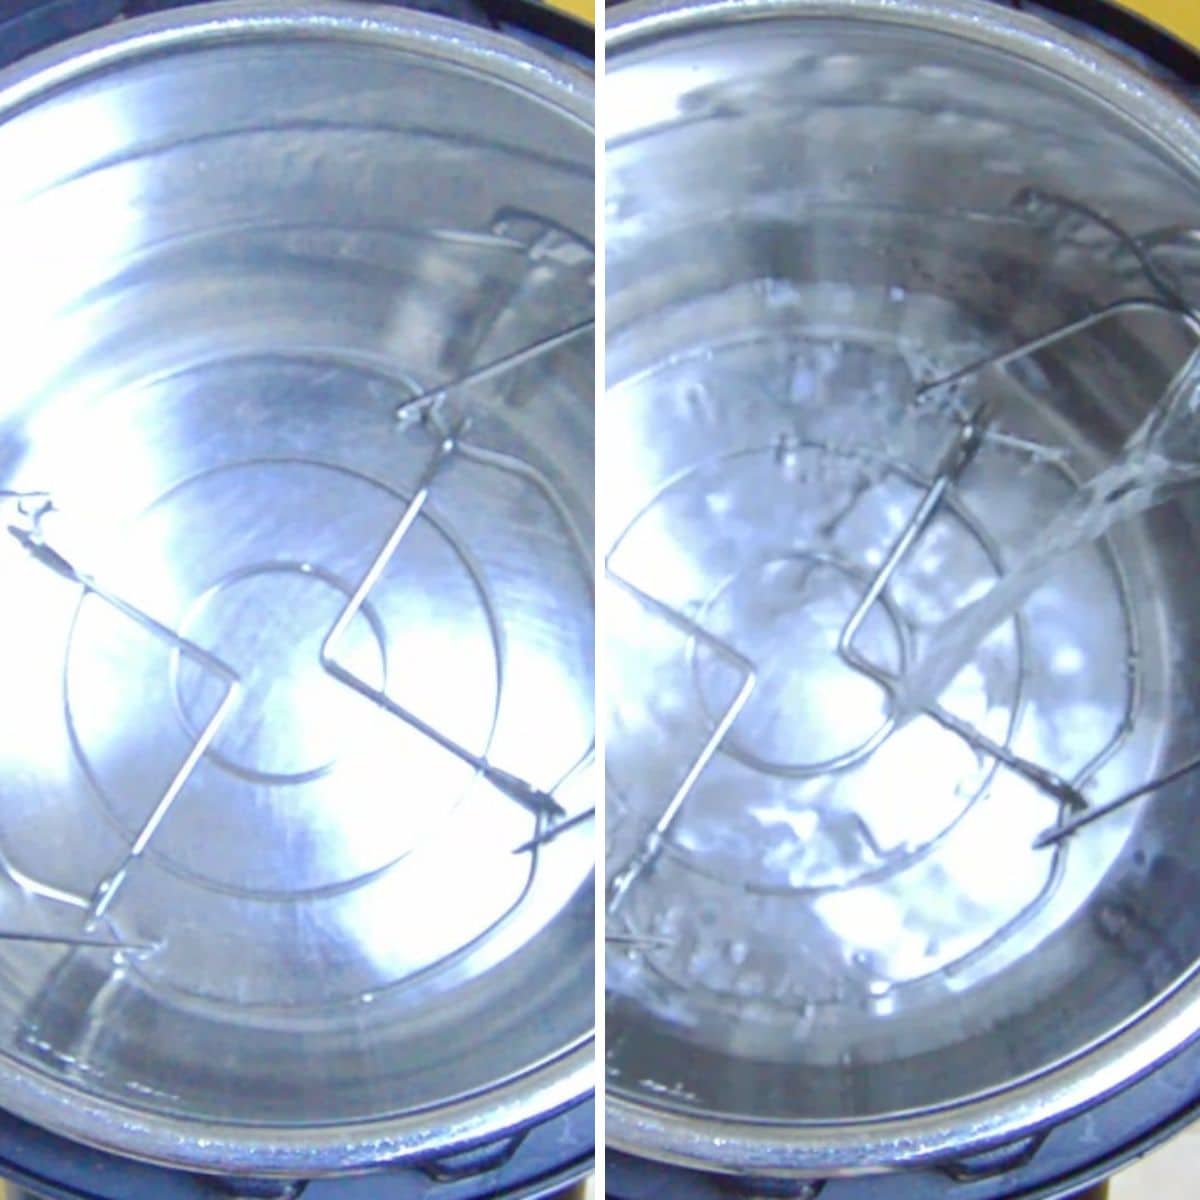 collage of 2 images - left image with trivet inside the instant pot and right image with pouring water.